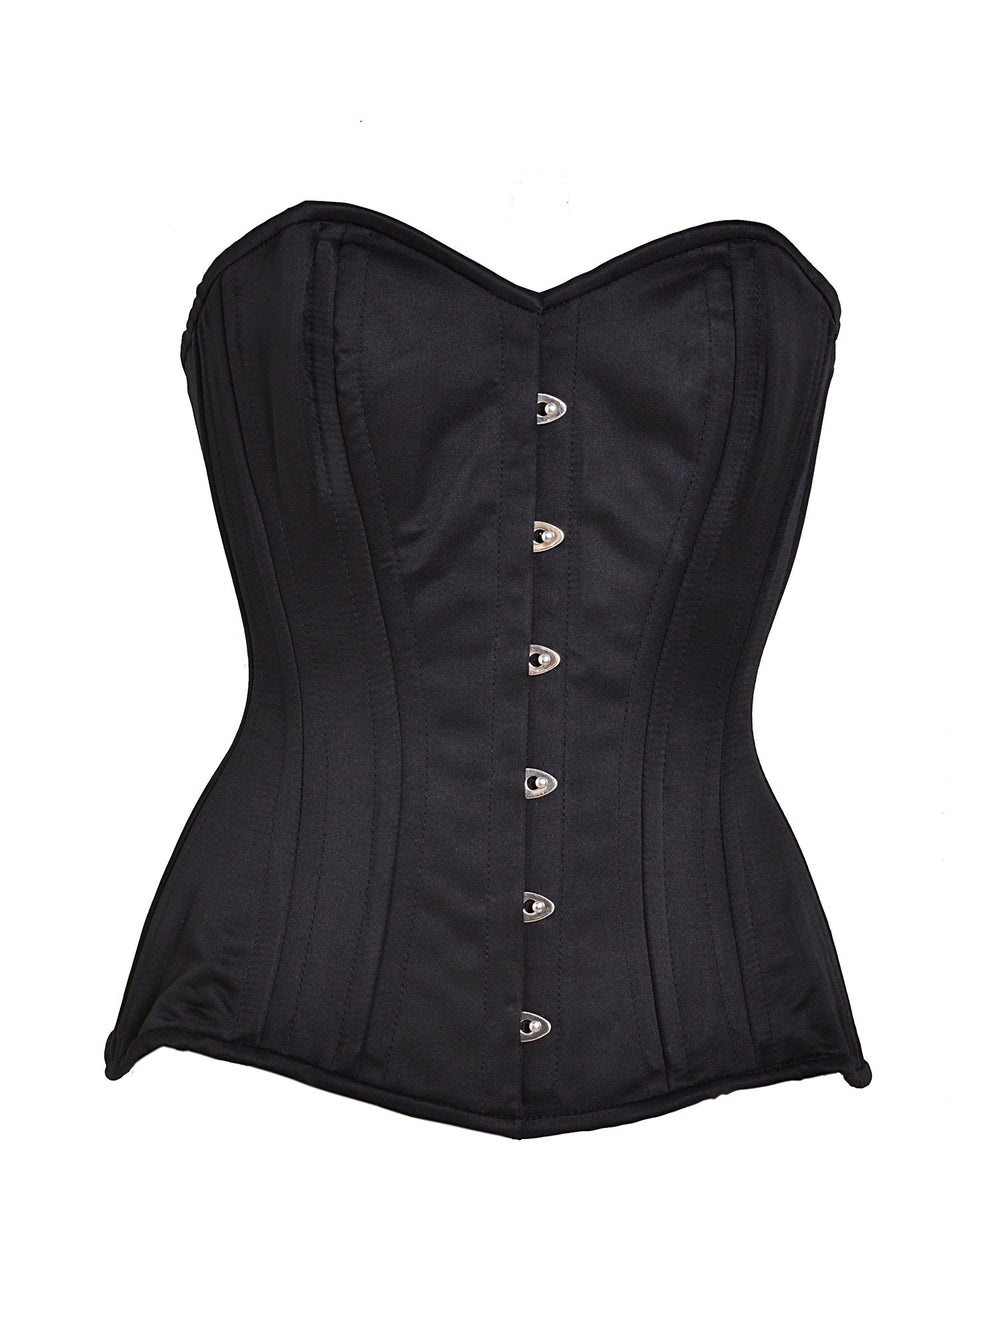 Red Satin Victorian Style Corset - Honour Clothing